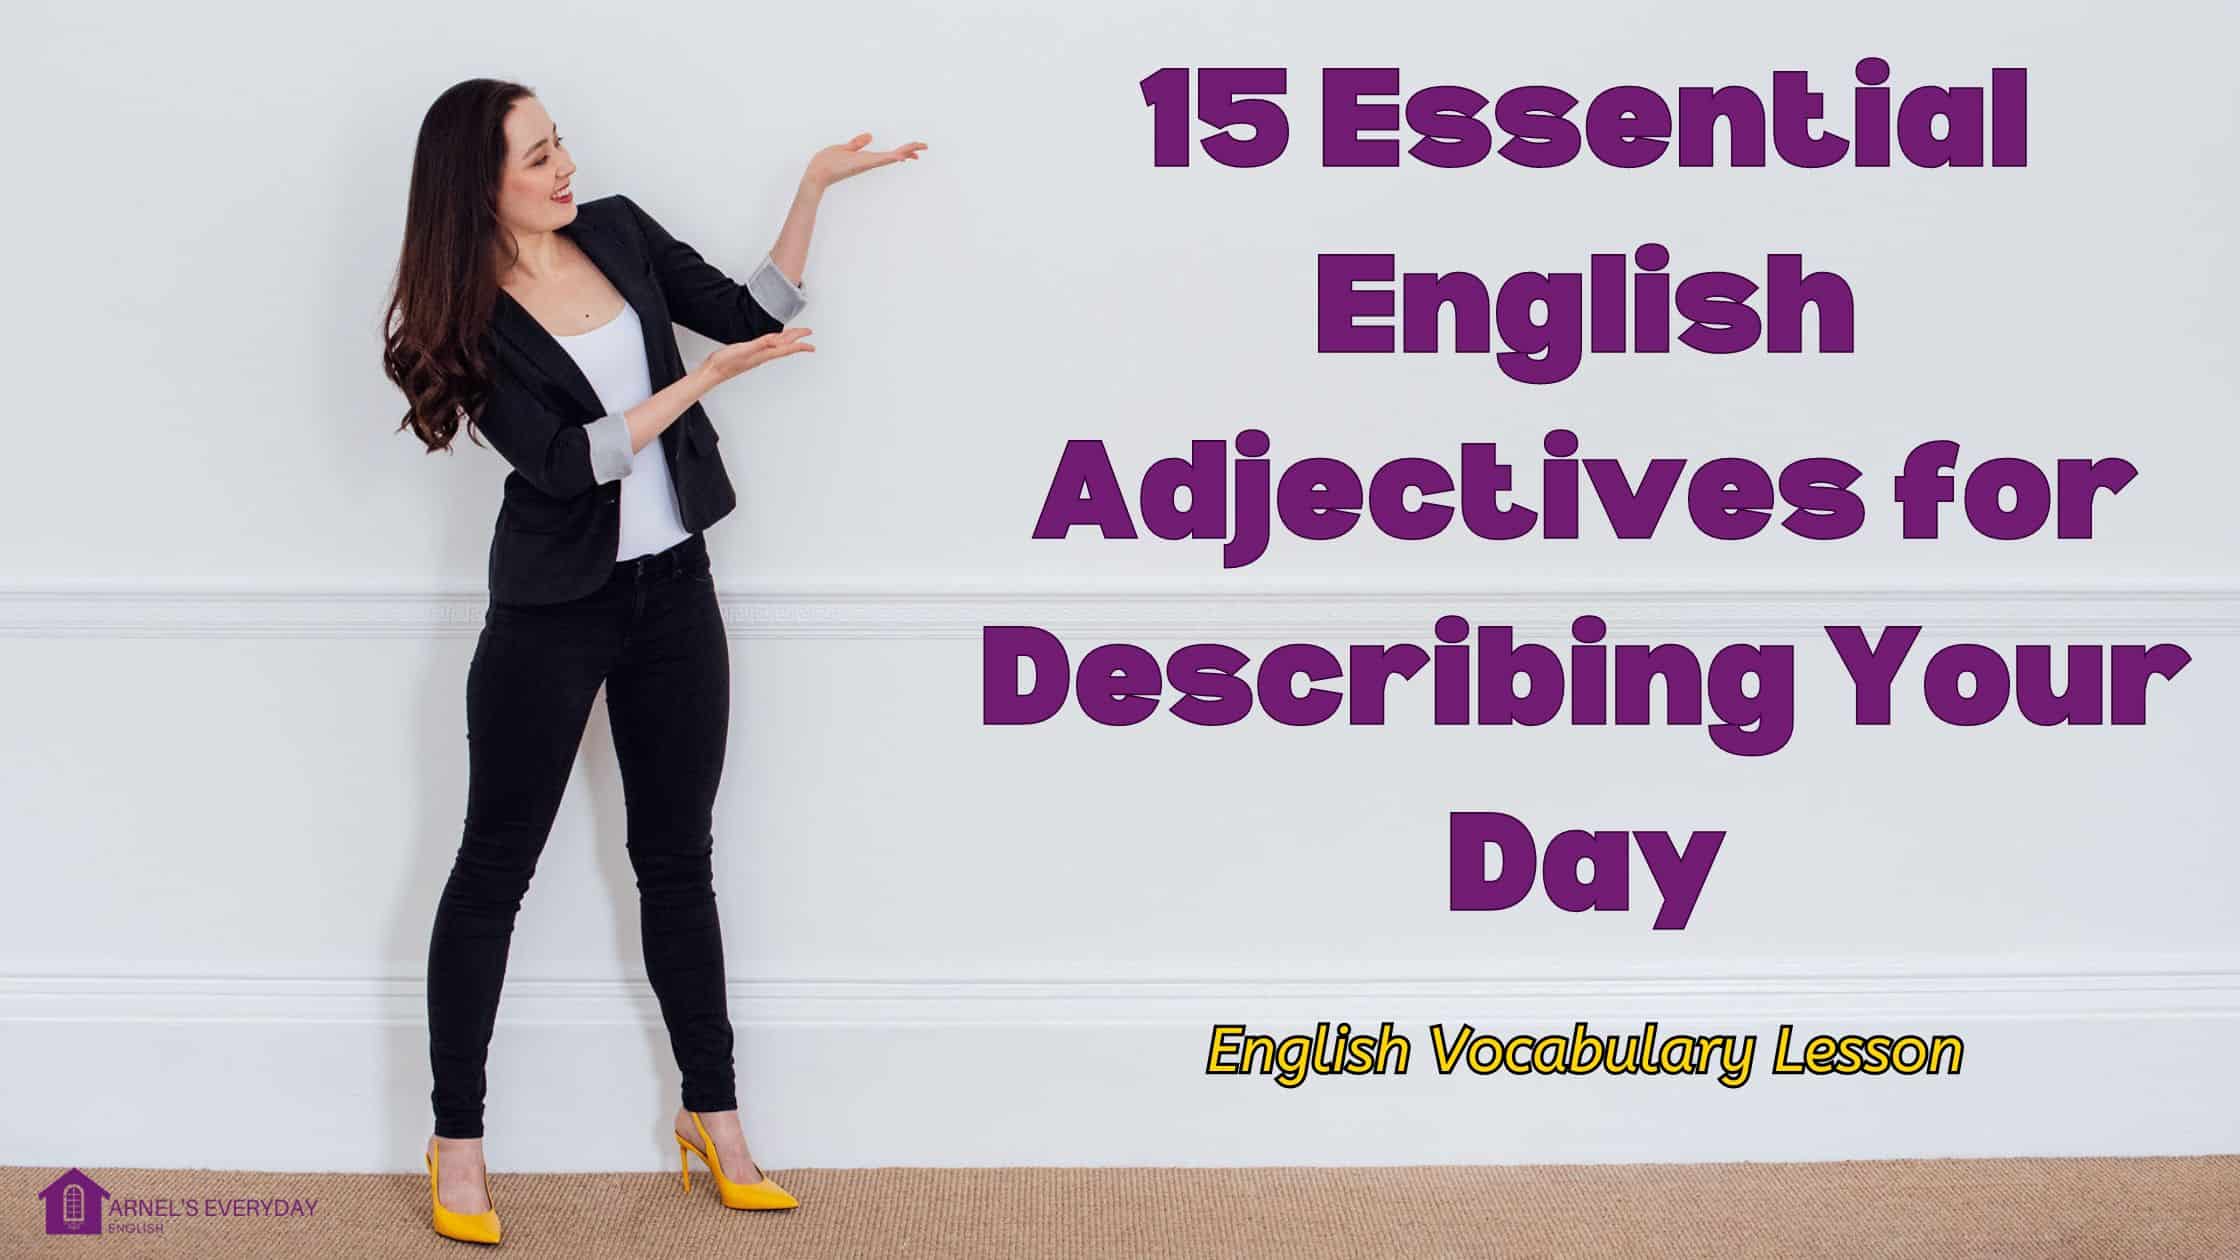 15 Essential English Adjectives for Describing Your Day